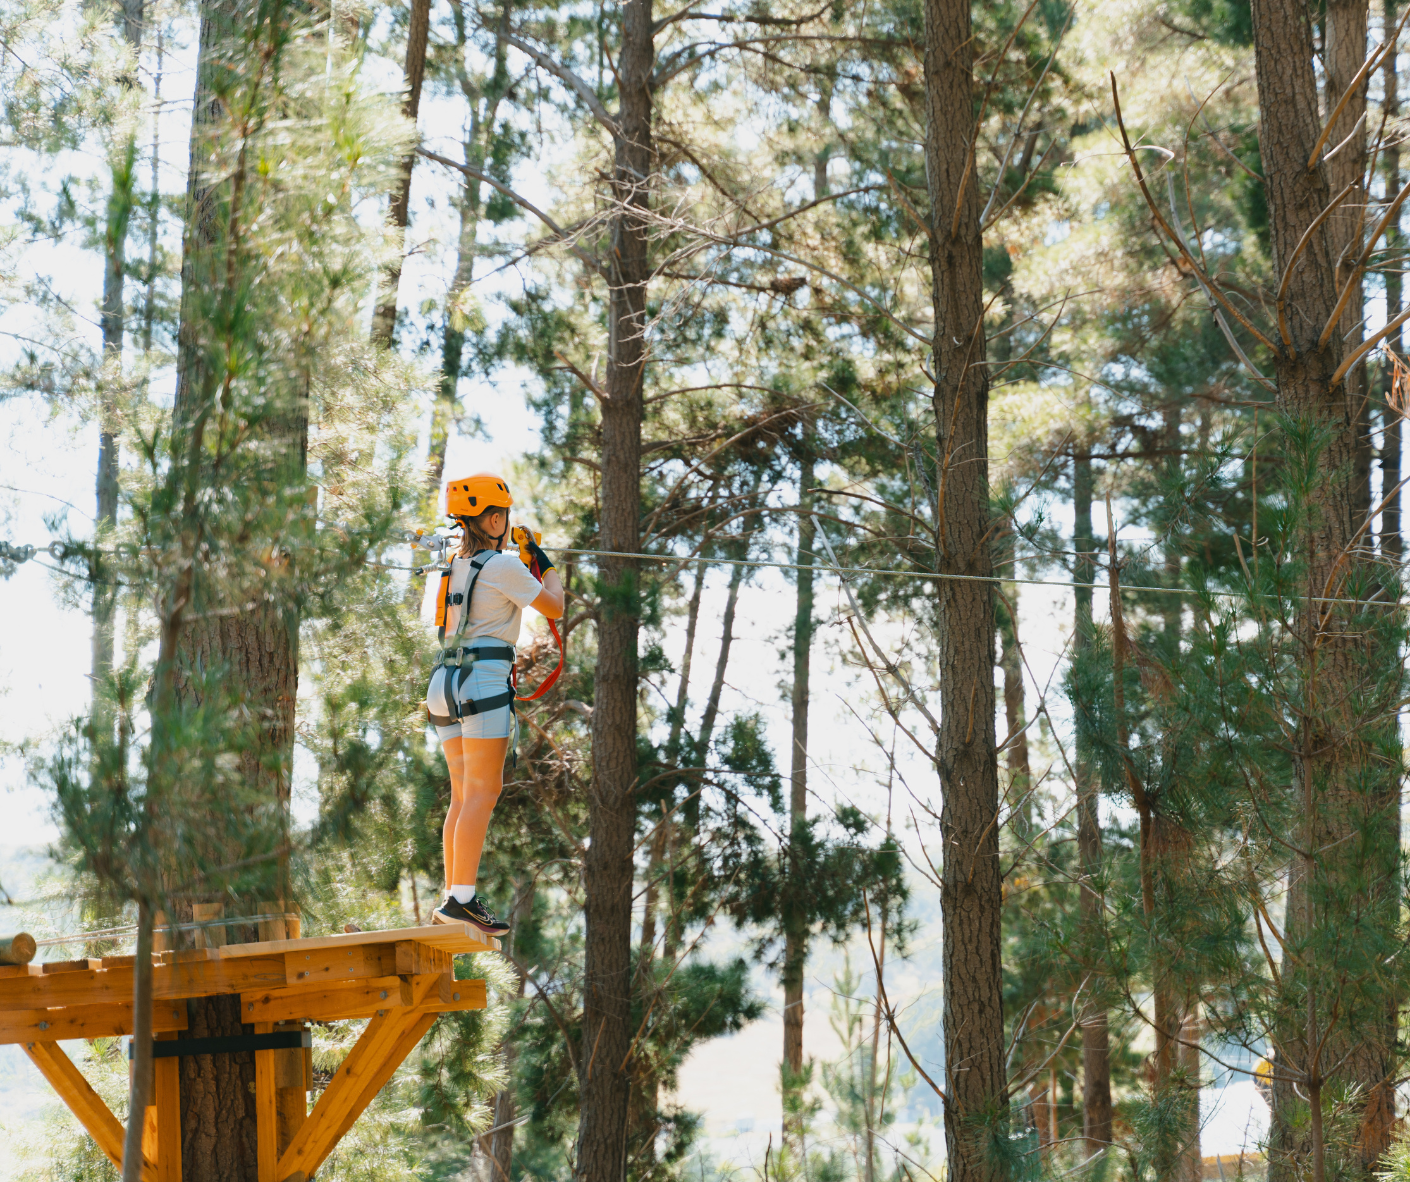 New Treetops Adventure park opens in Canberra